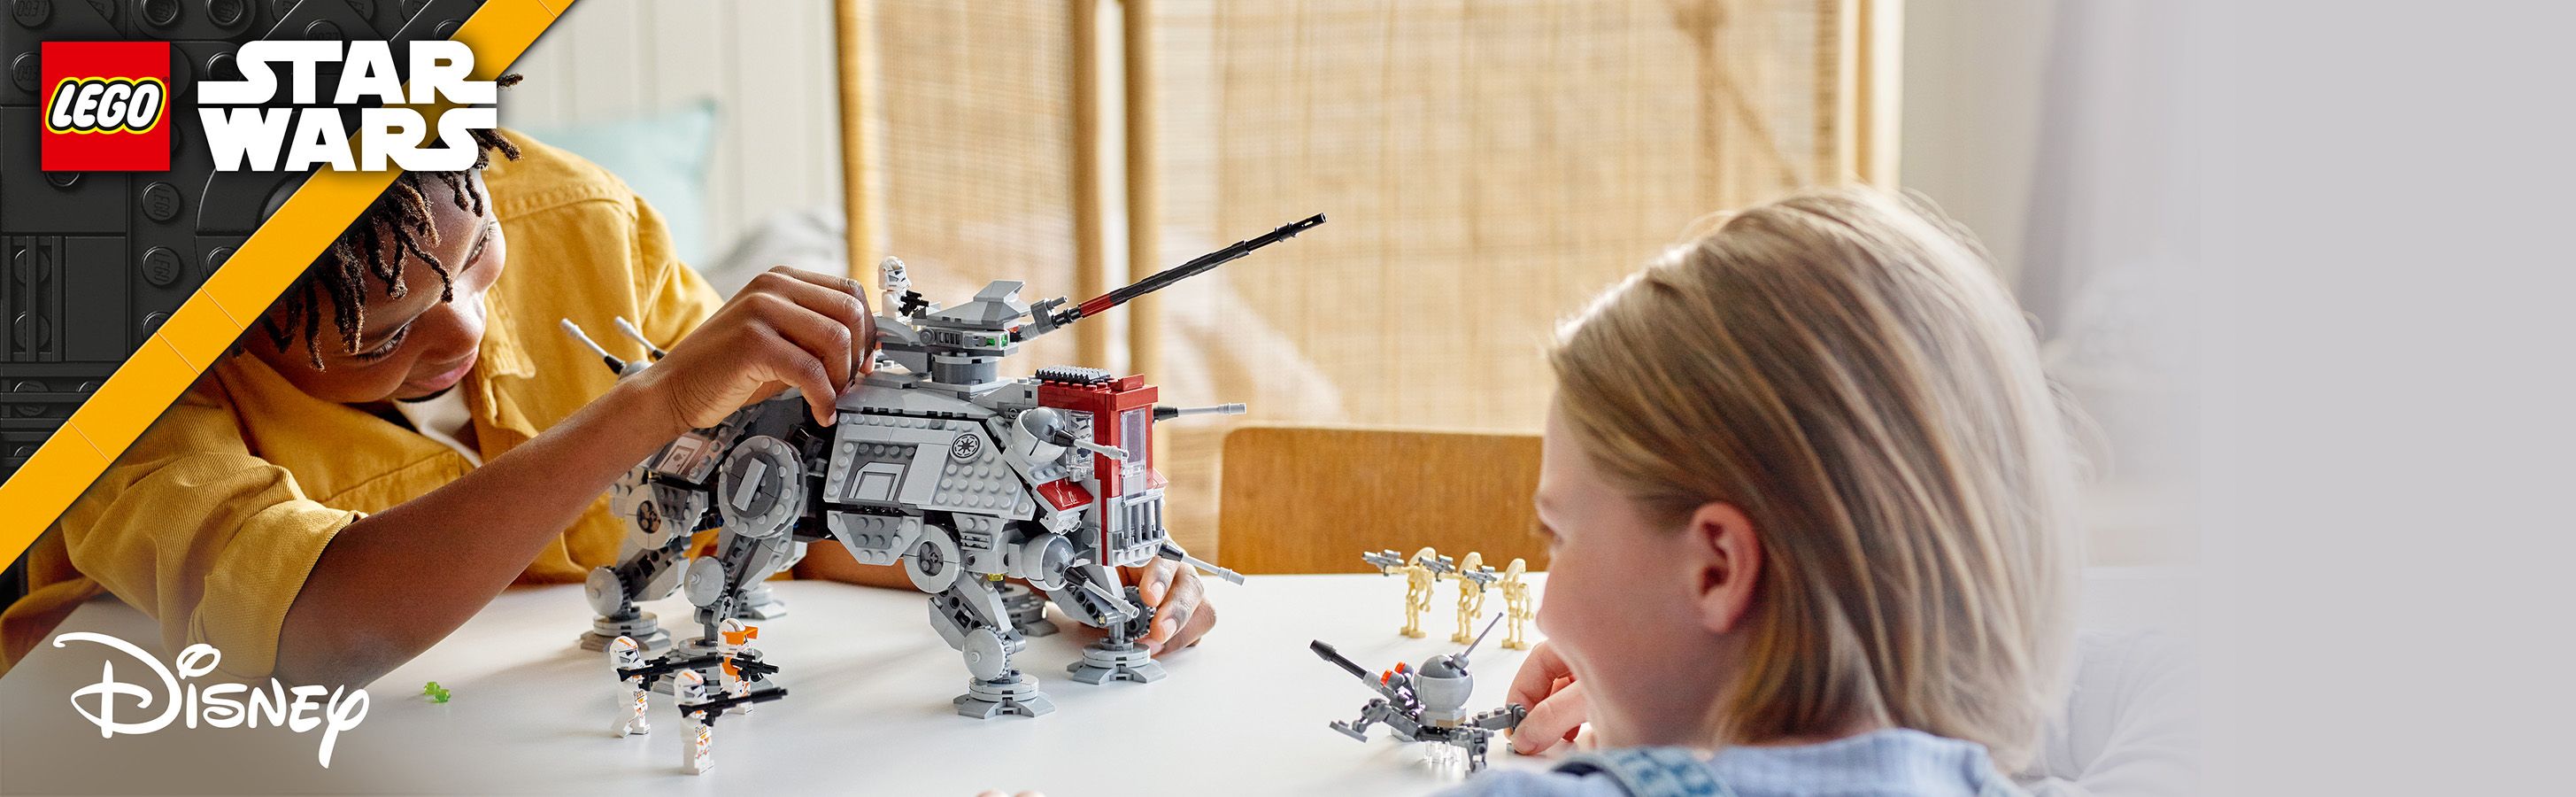 Lego Star Wars Le marcheur AT-TE™ 75337